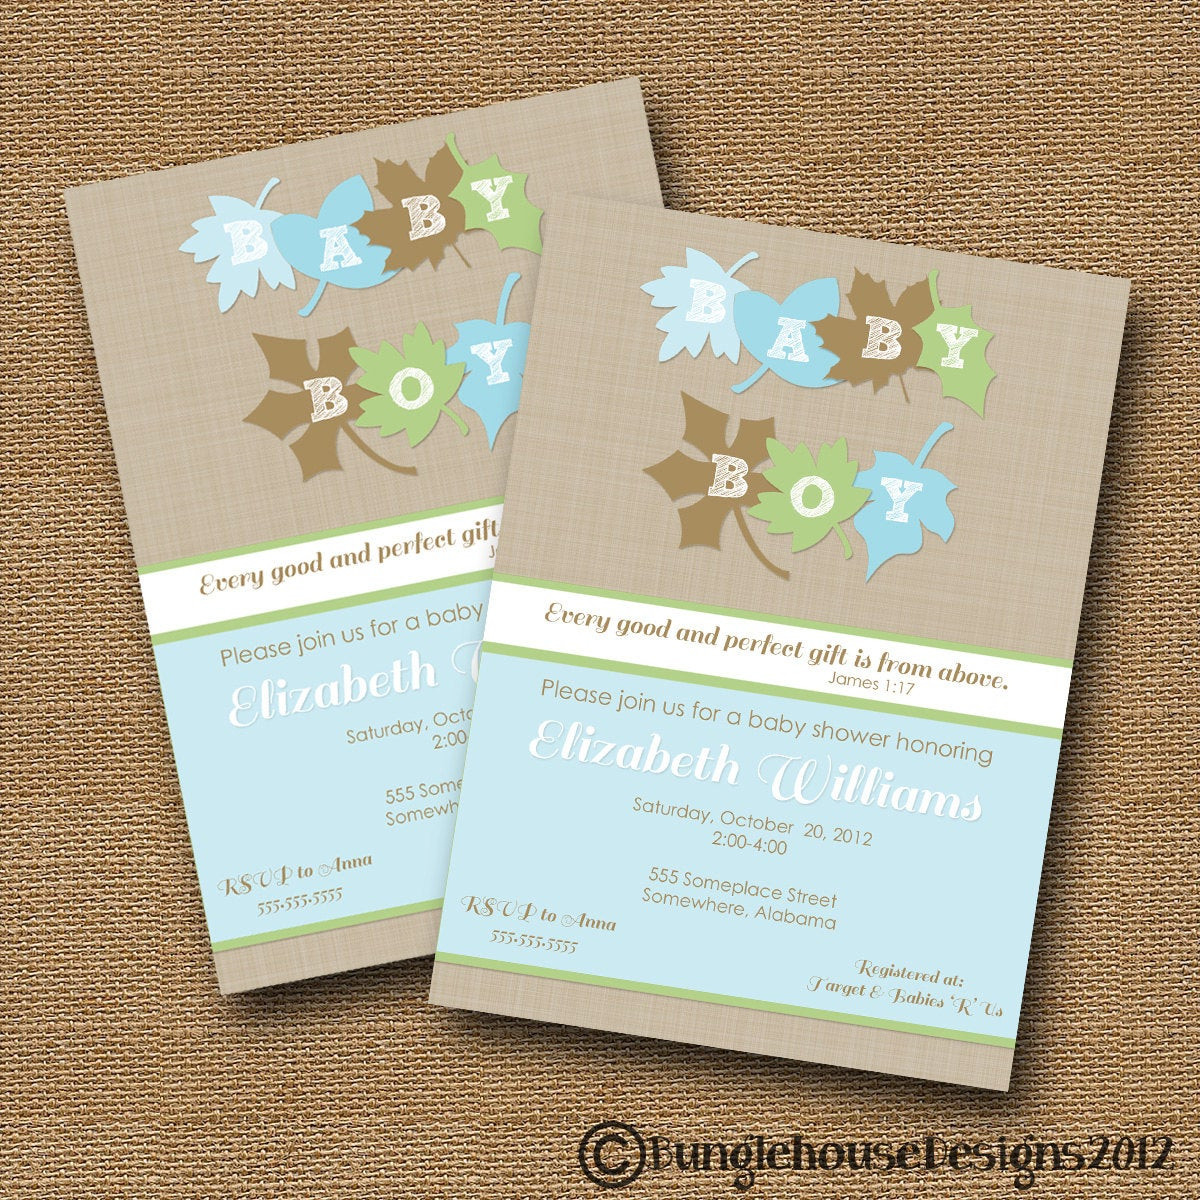 DIY Baby Shower Invitation
 Fall Leaves Baby Shower Invitation DIY by bunglehousedesigns